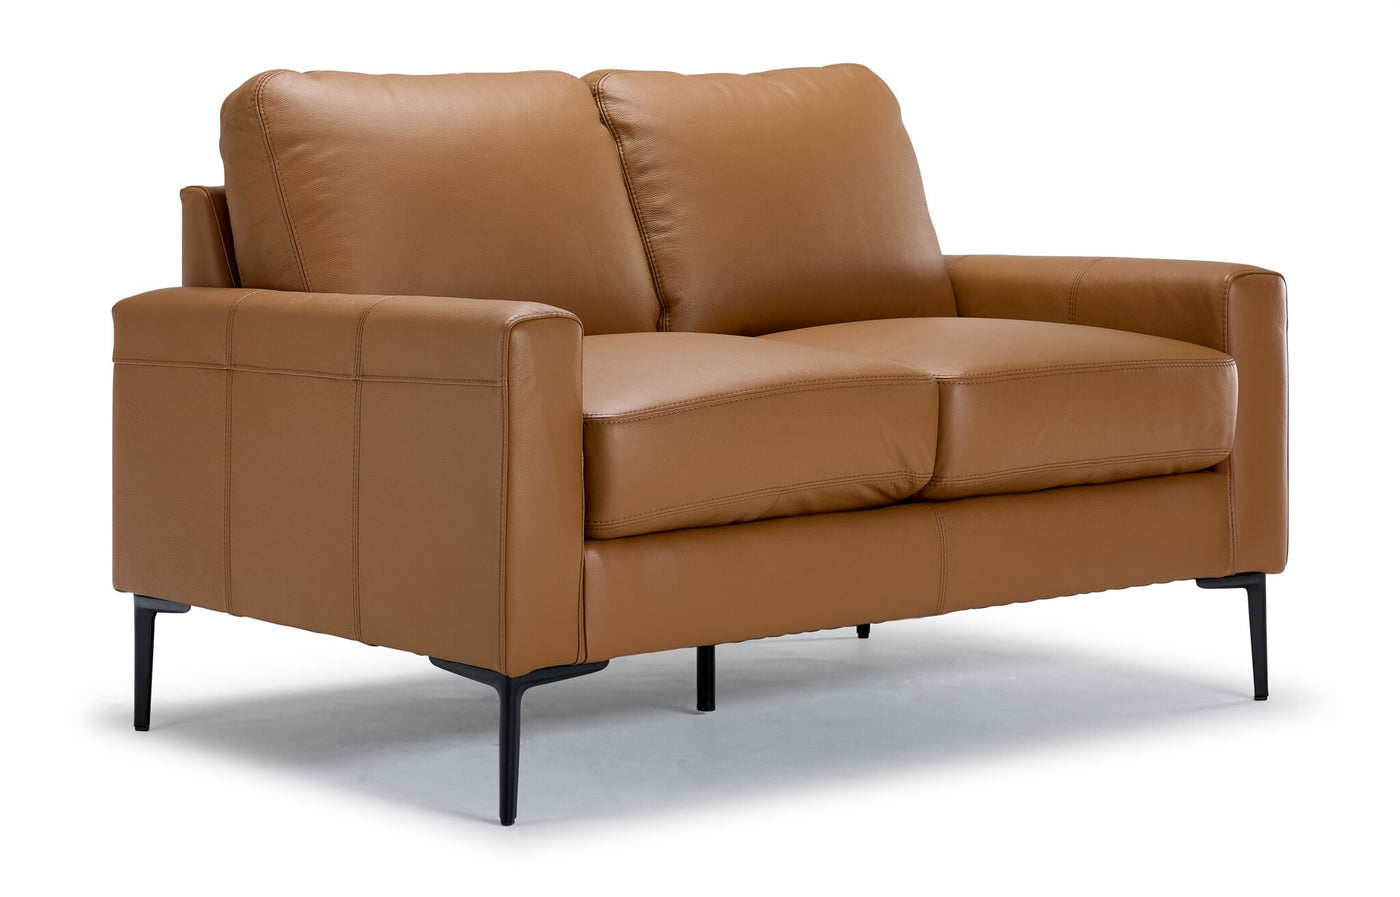 Chito Leather Sofa, Loveseat and Chair Set - Saddle